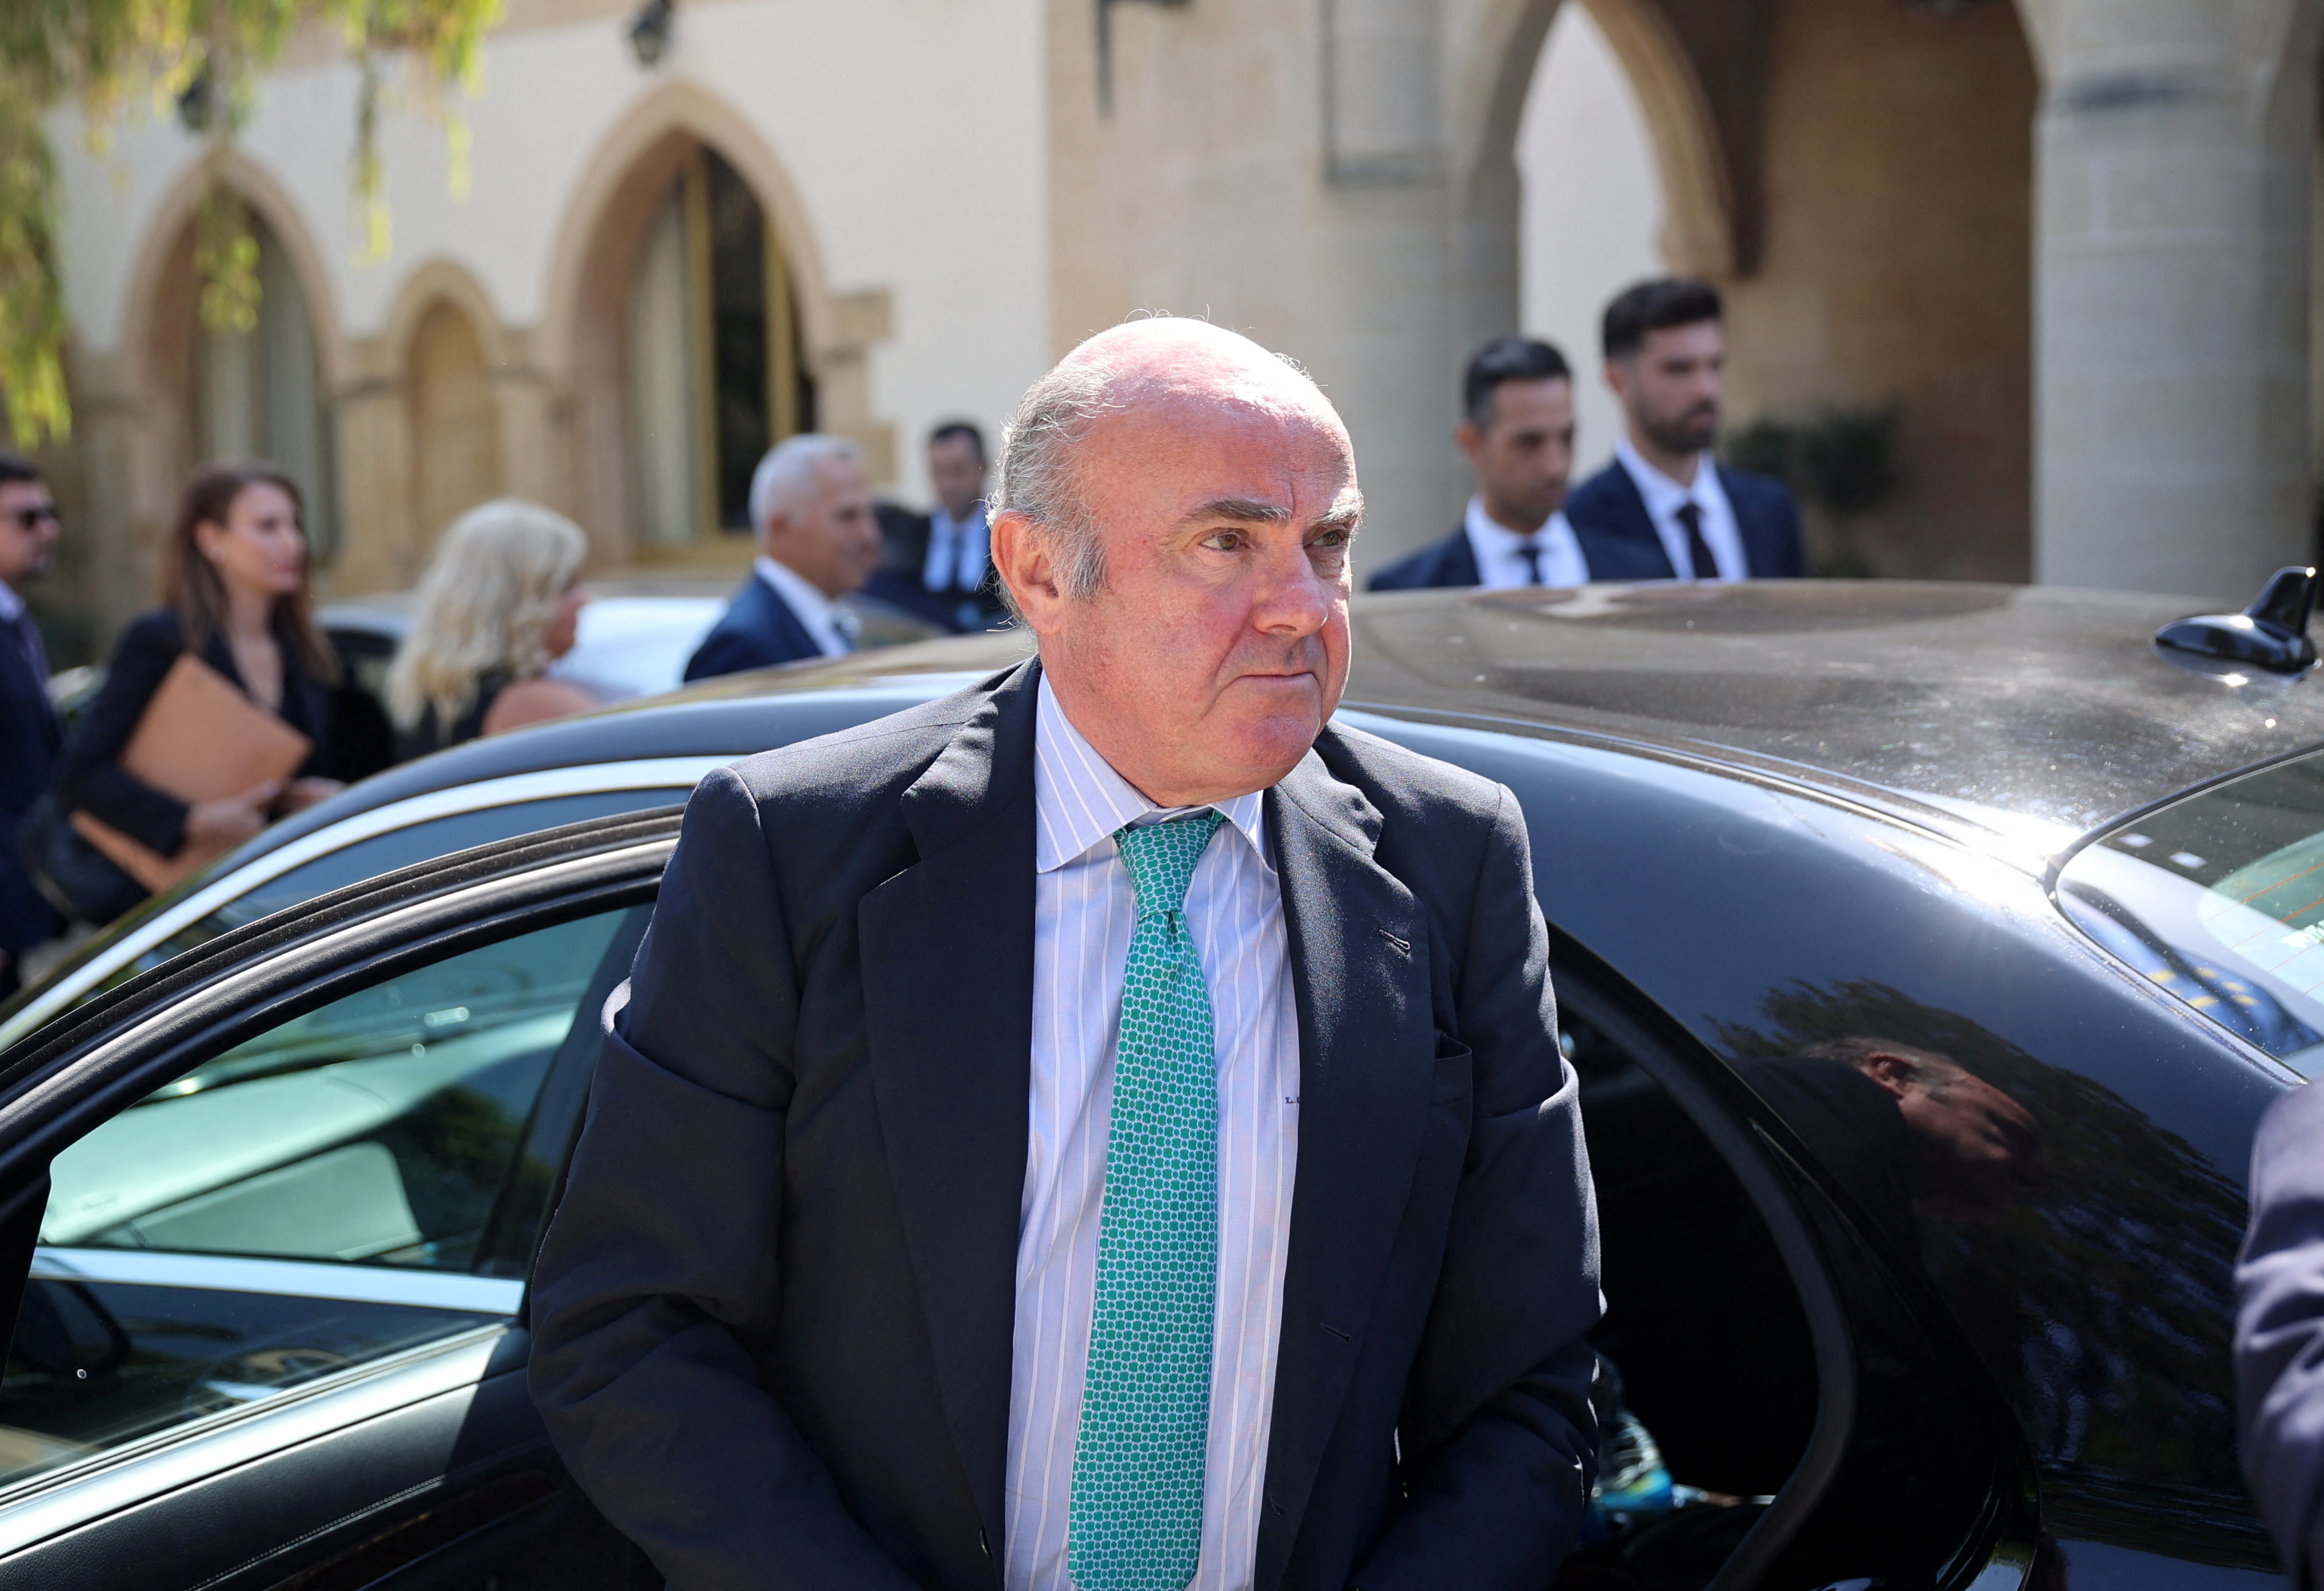 European Central Bank (ECB) Vice-President Luis de Guindos arrives at the Presidential Palace for a meeting with Cyprus President Nikos Christodoulides in Nicosia